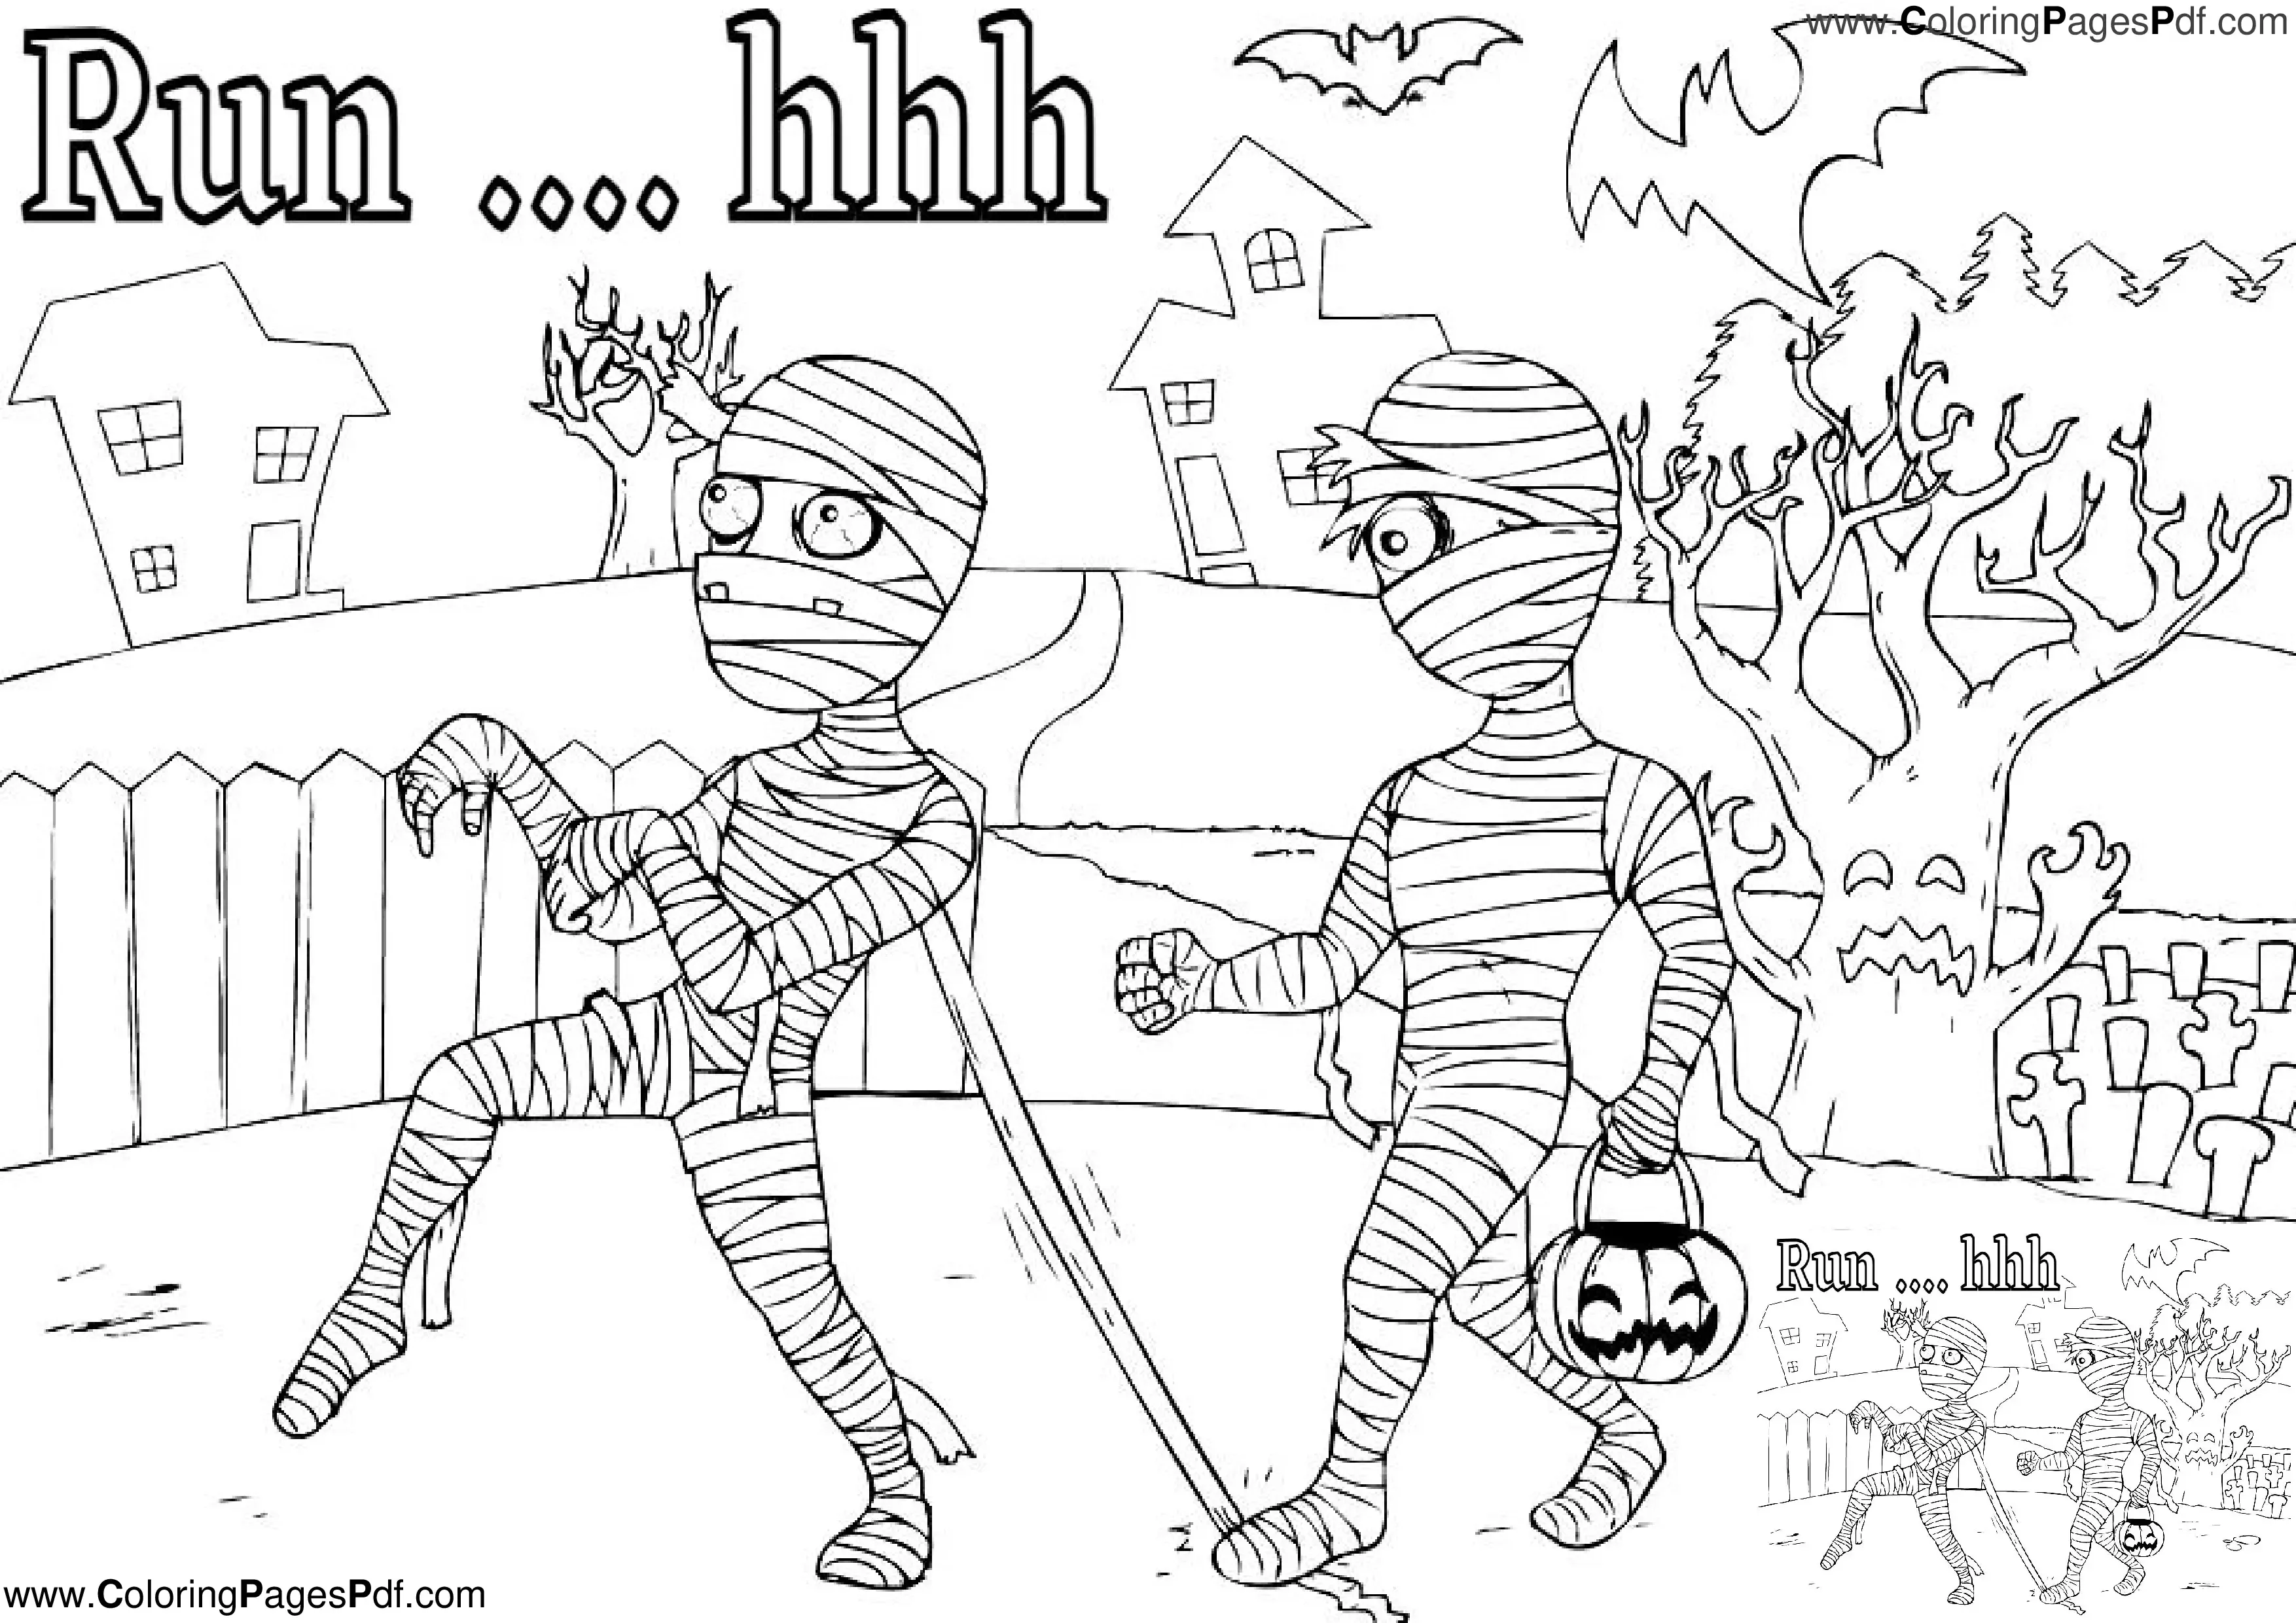 Scary Halloween coloring pages